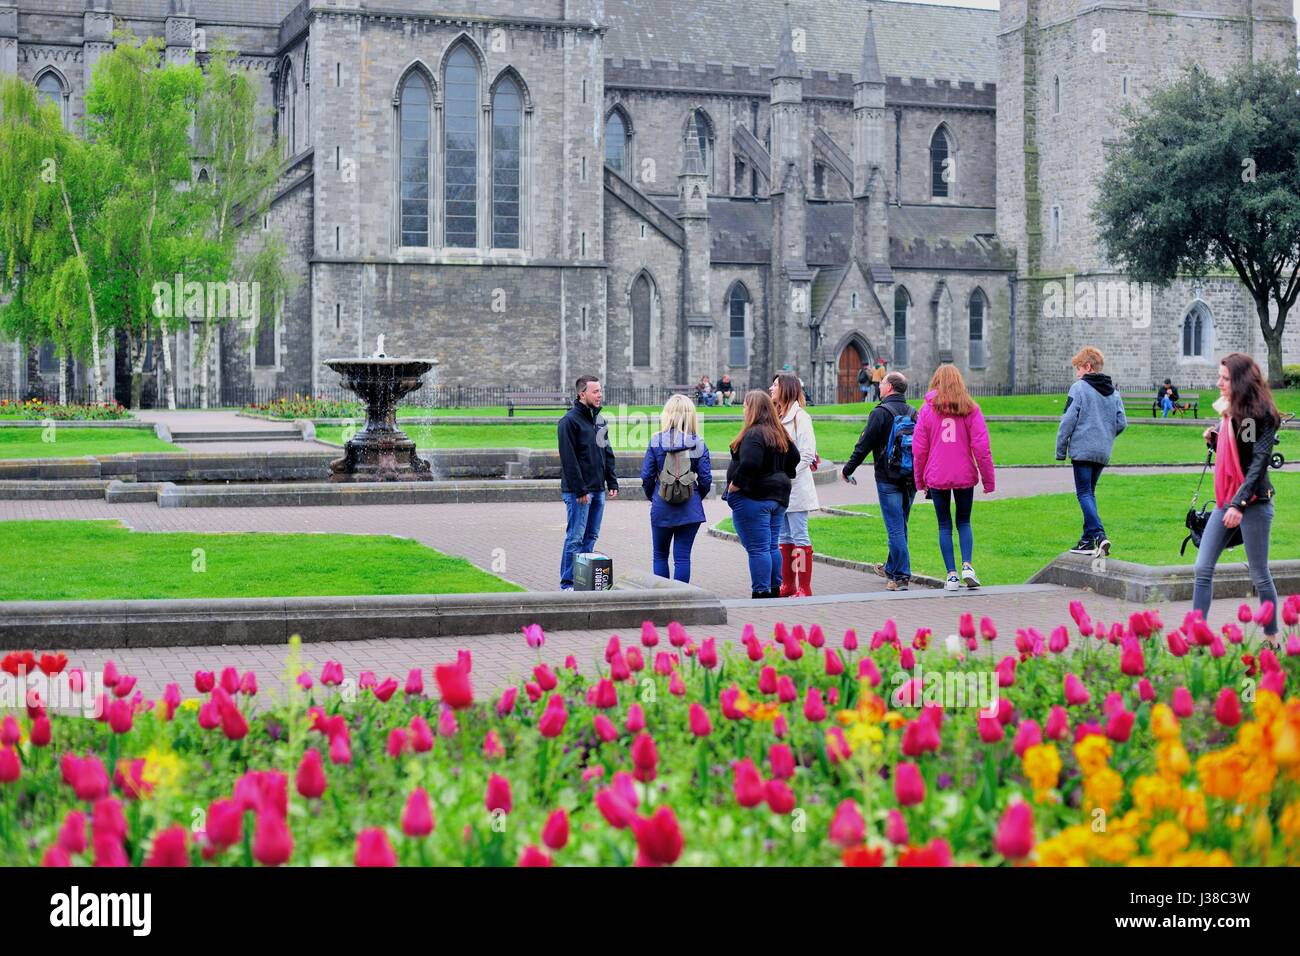 People mingle and interact at a park at St. Patrick's Cathedral in Dublin. The cathedral dates from 1254 to 1270. Dublin, Ireland. Stock Photo